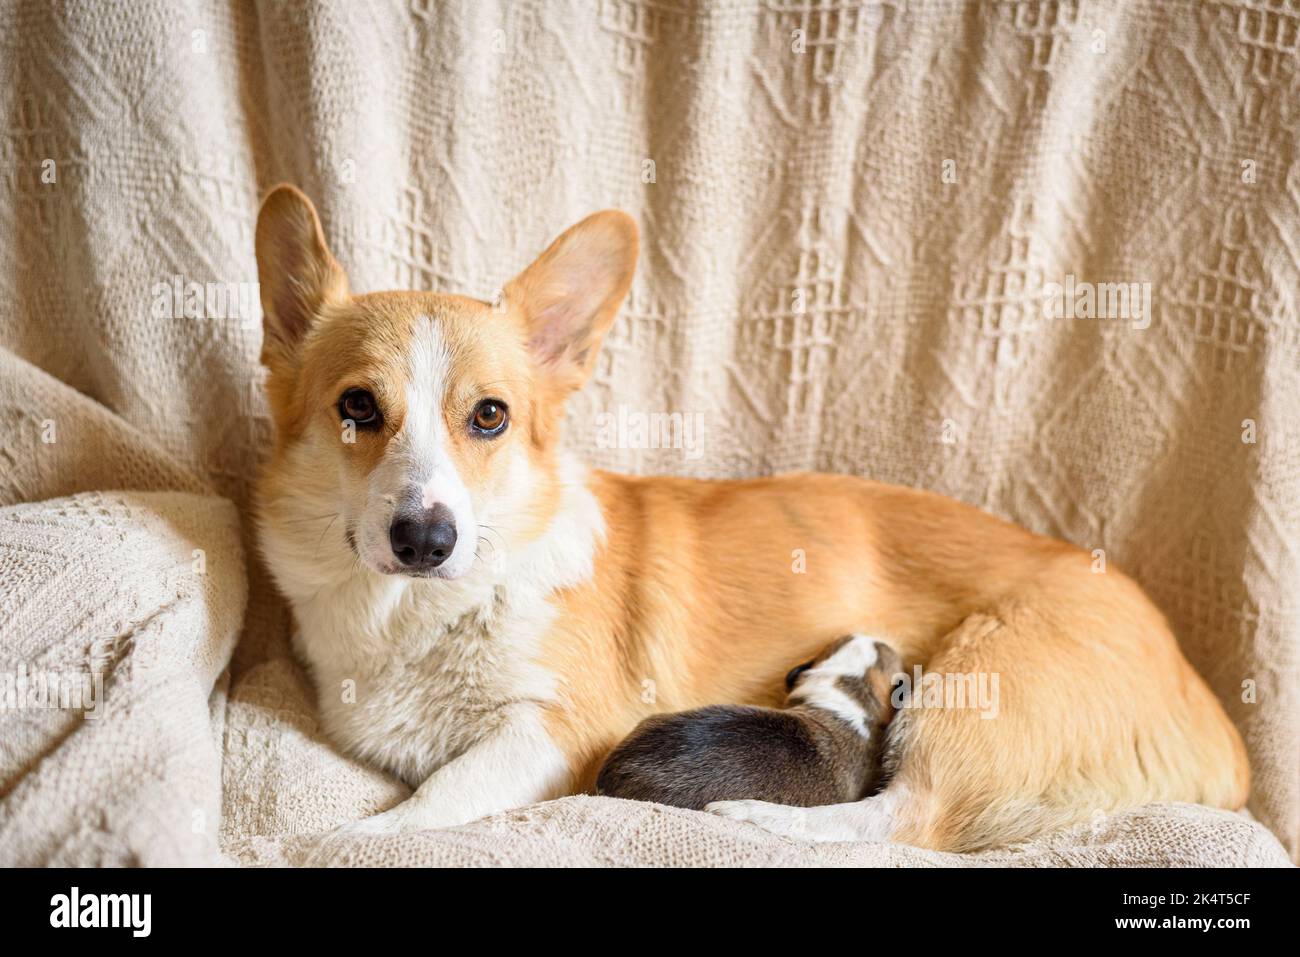 Red and white Pembroke Welsh Corgi mom dog feeds puppy looking at camera Stock Photo